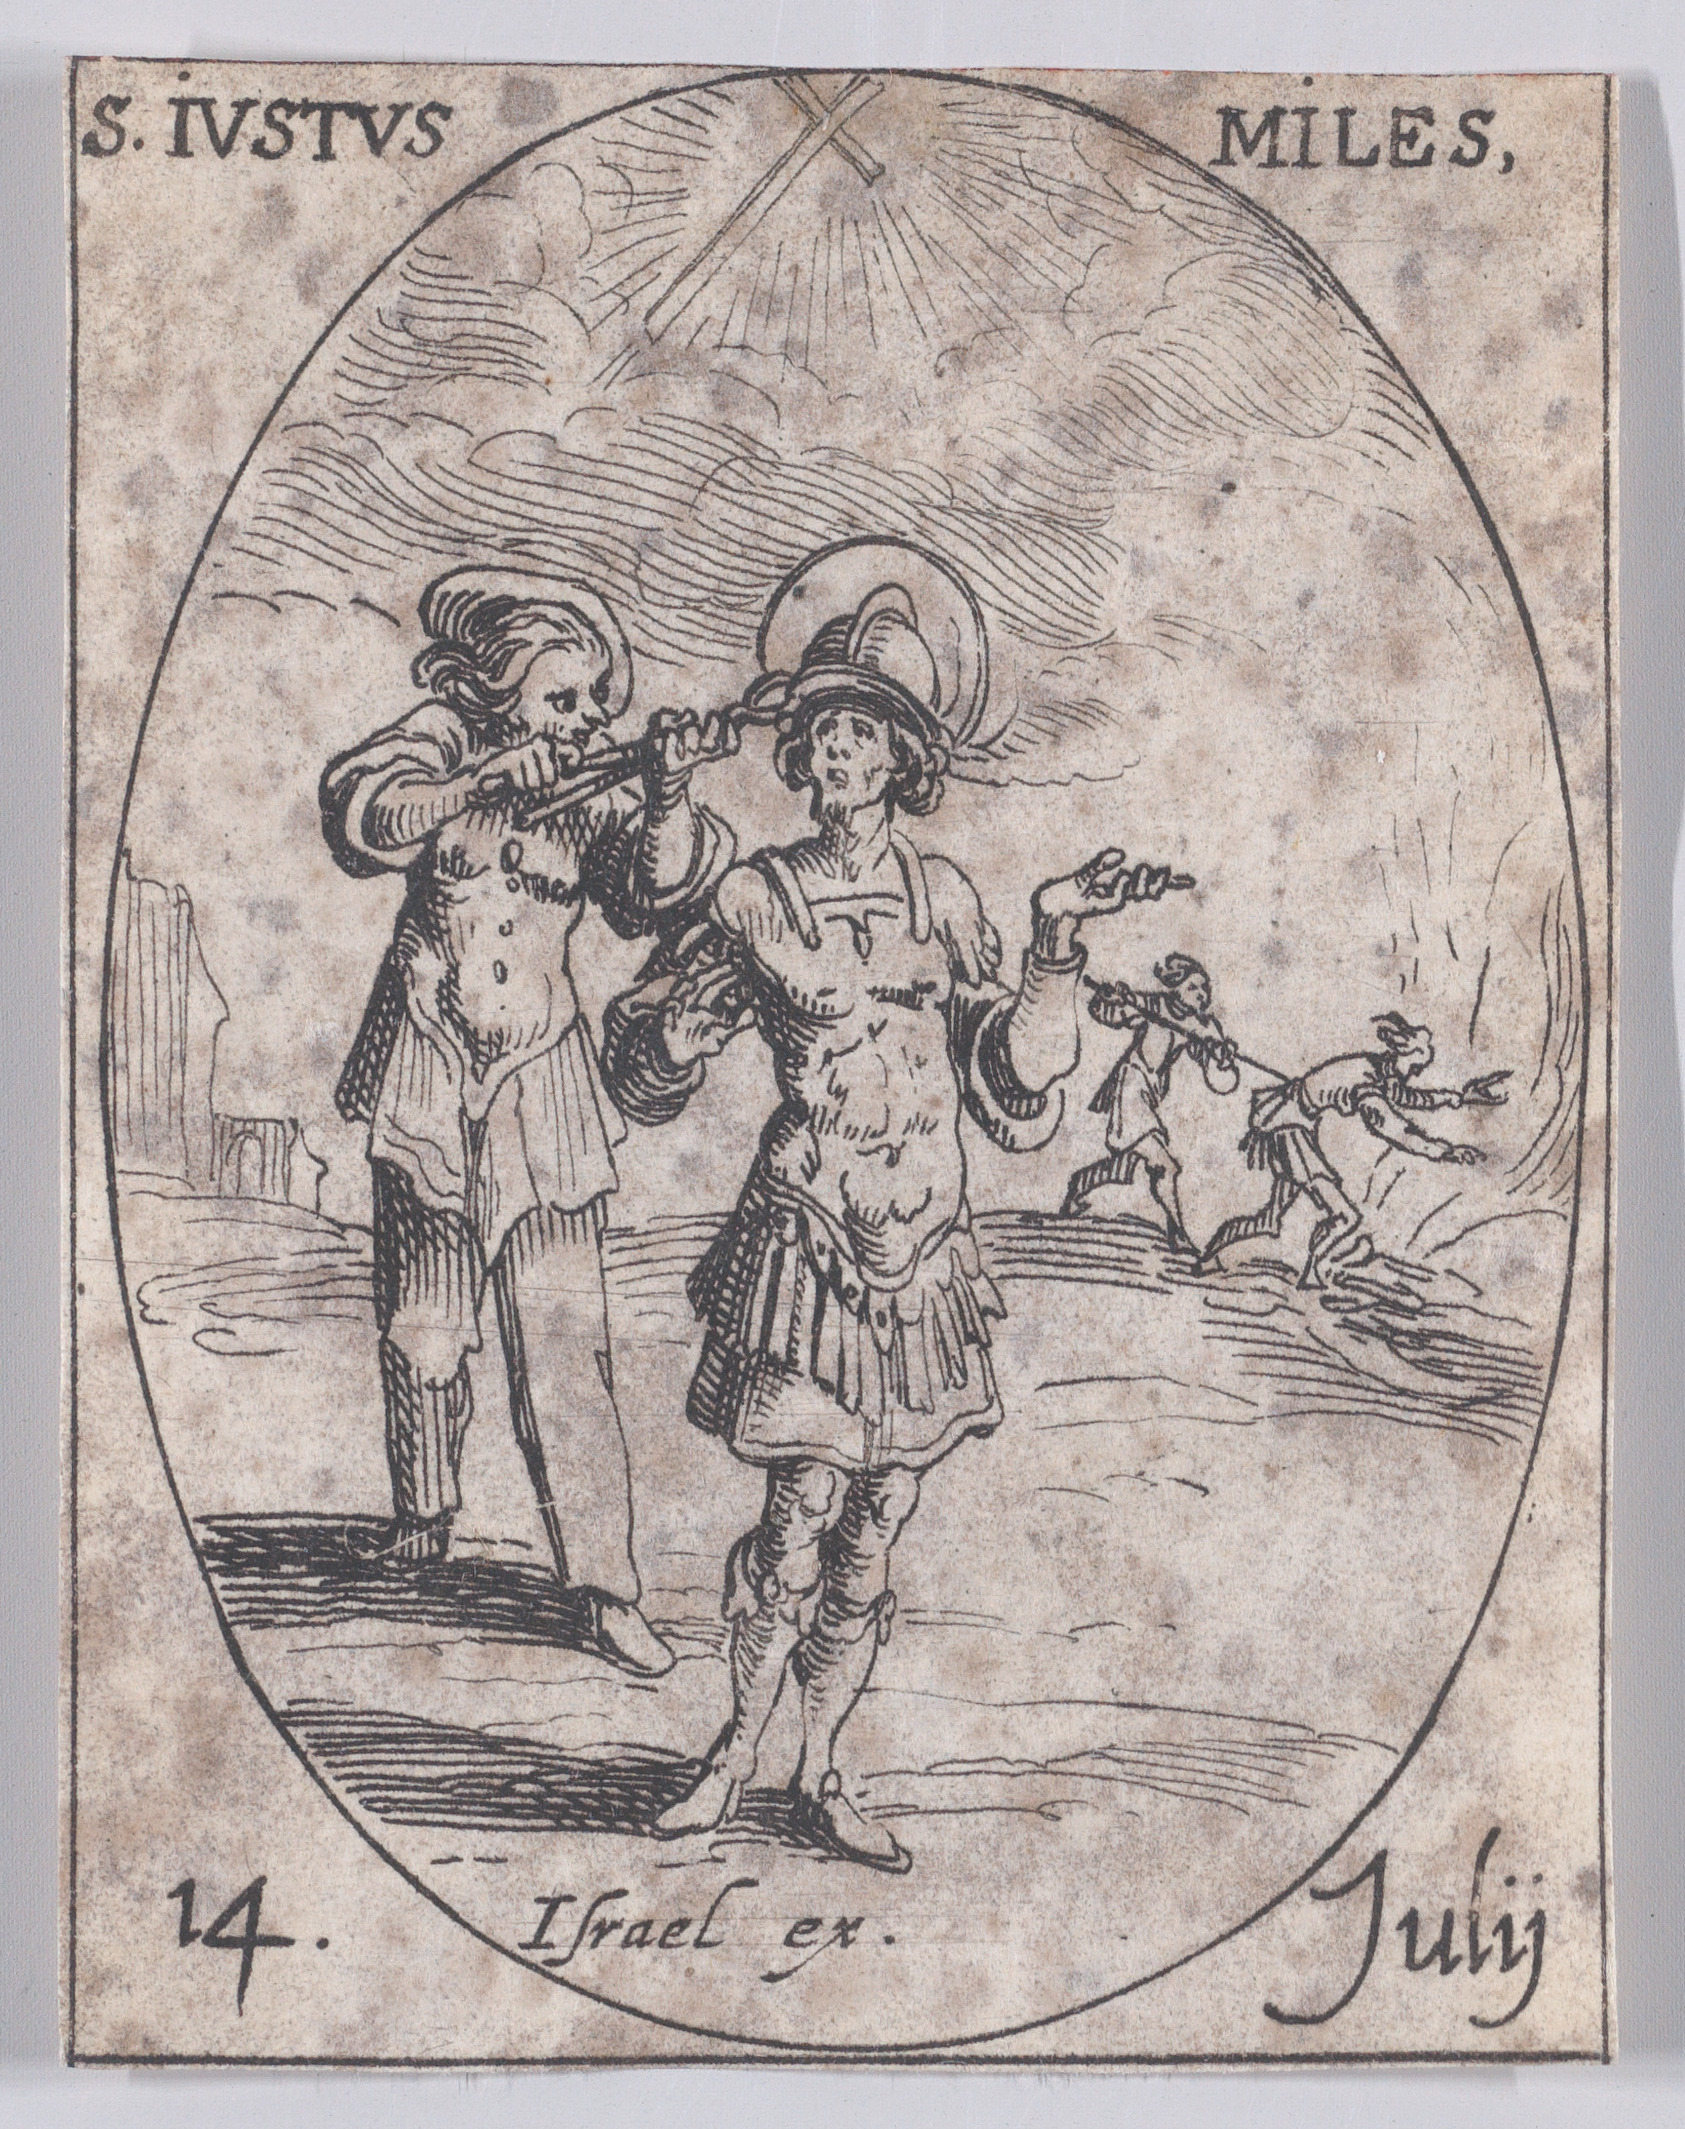 S. Juste, soldat (St. Justus, Soldier), July 14th, from Les Images De Tous Les Saincts et Saintes de L'Année (Images of All of the Saints and Religious Events of the Year), Jacques Callot (French, Nancy 1592–1635 Nancy), Etching; second state of two (Lieure)